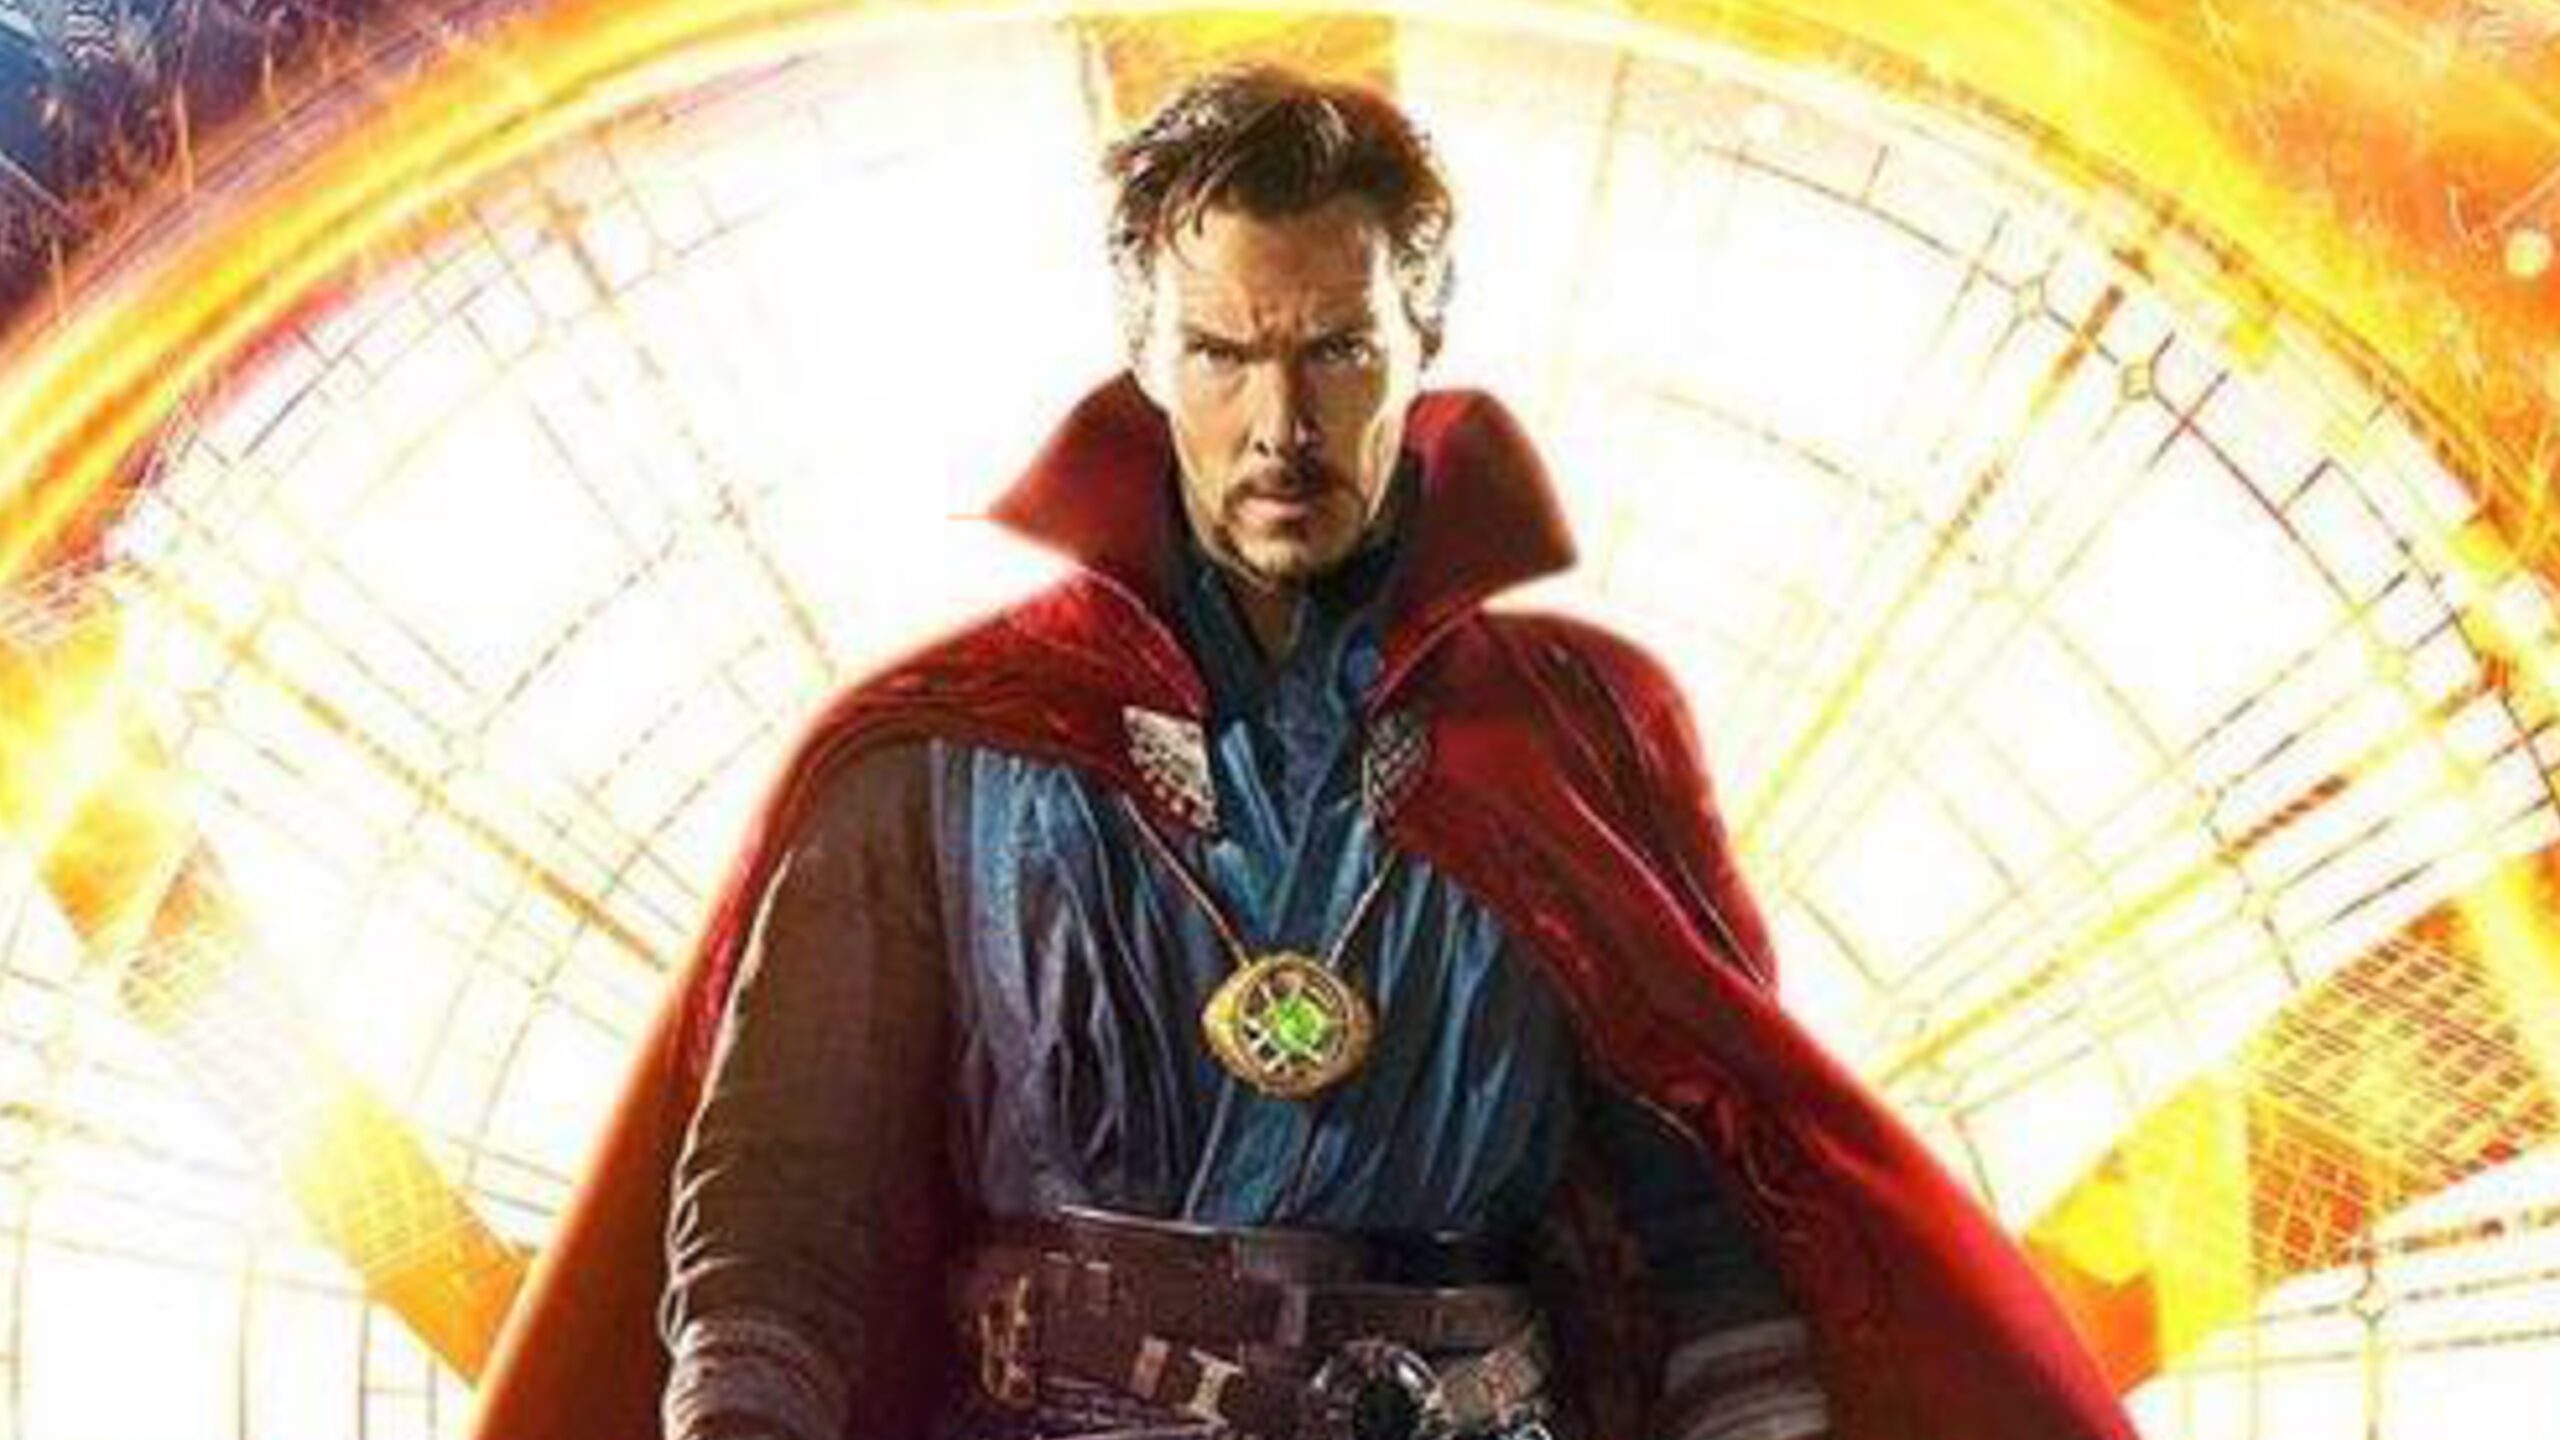 Benedict Cumberbatch once visted a comic store as Doctor Strange